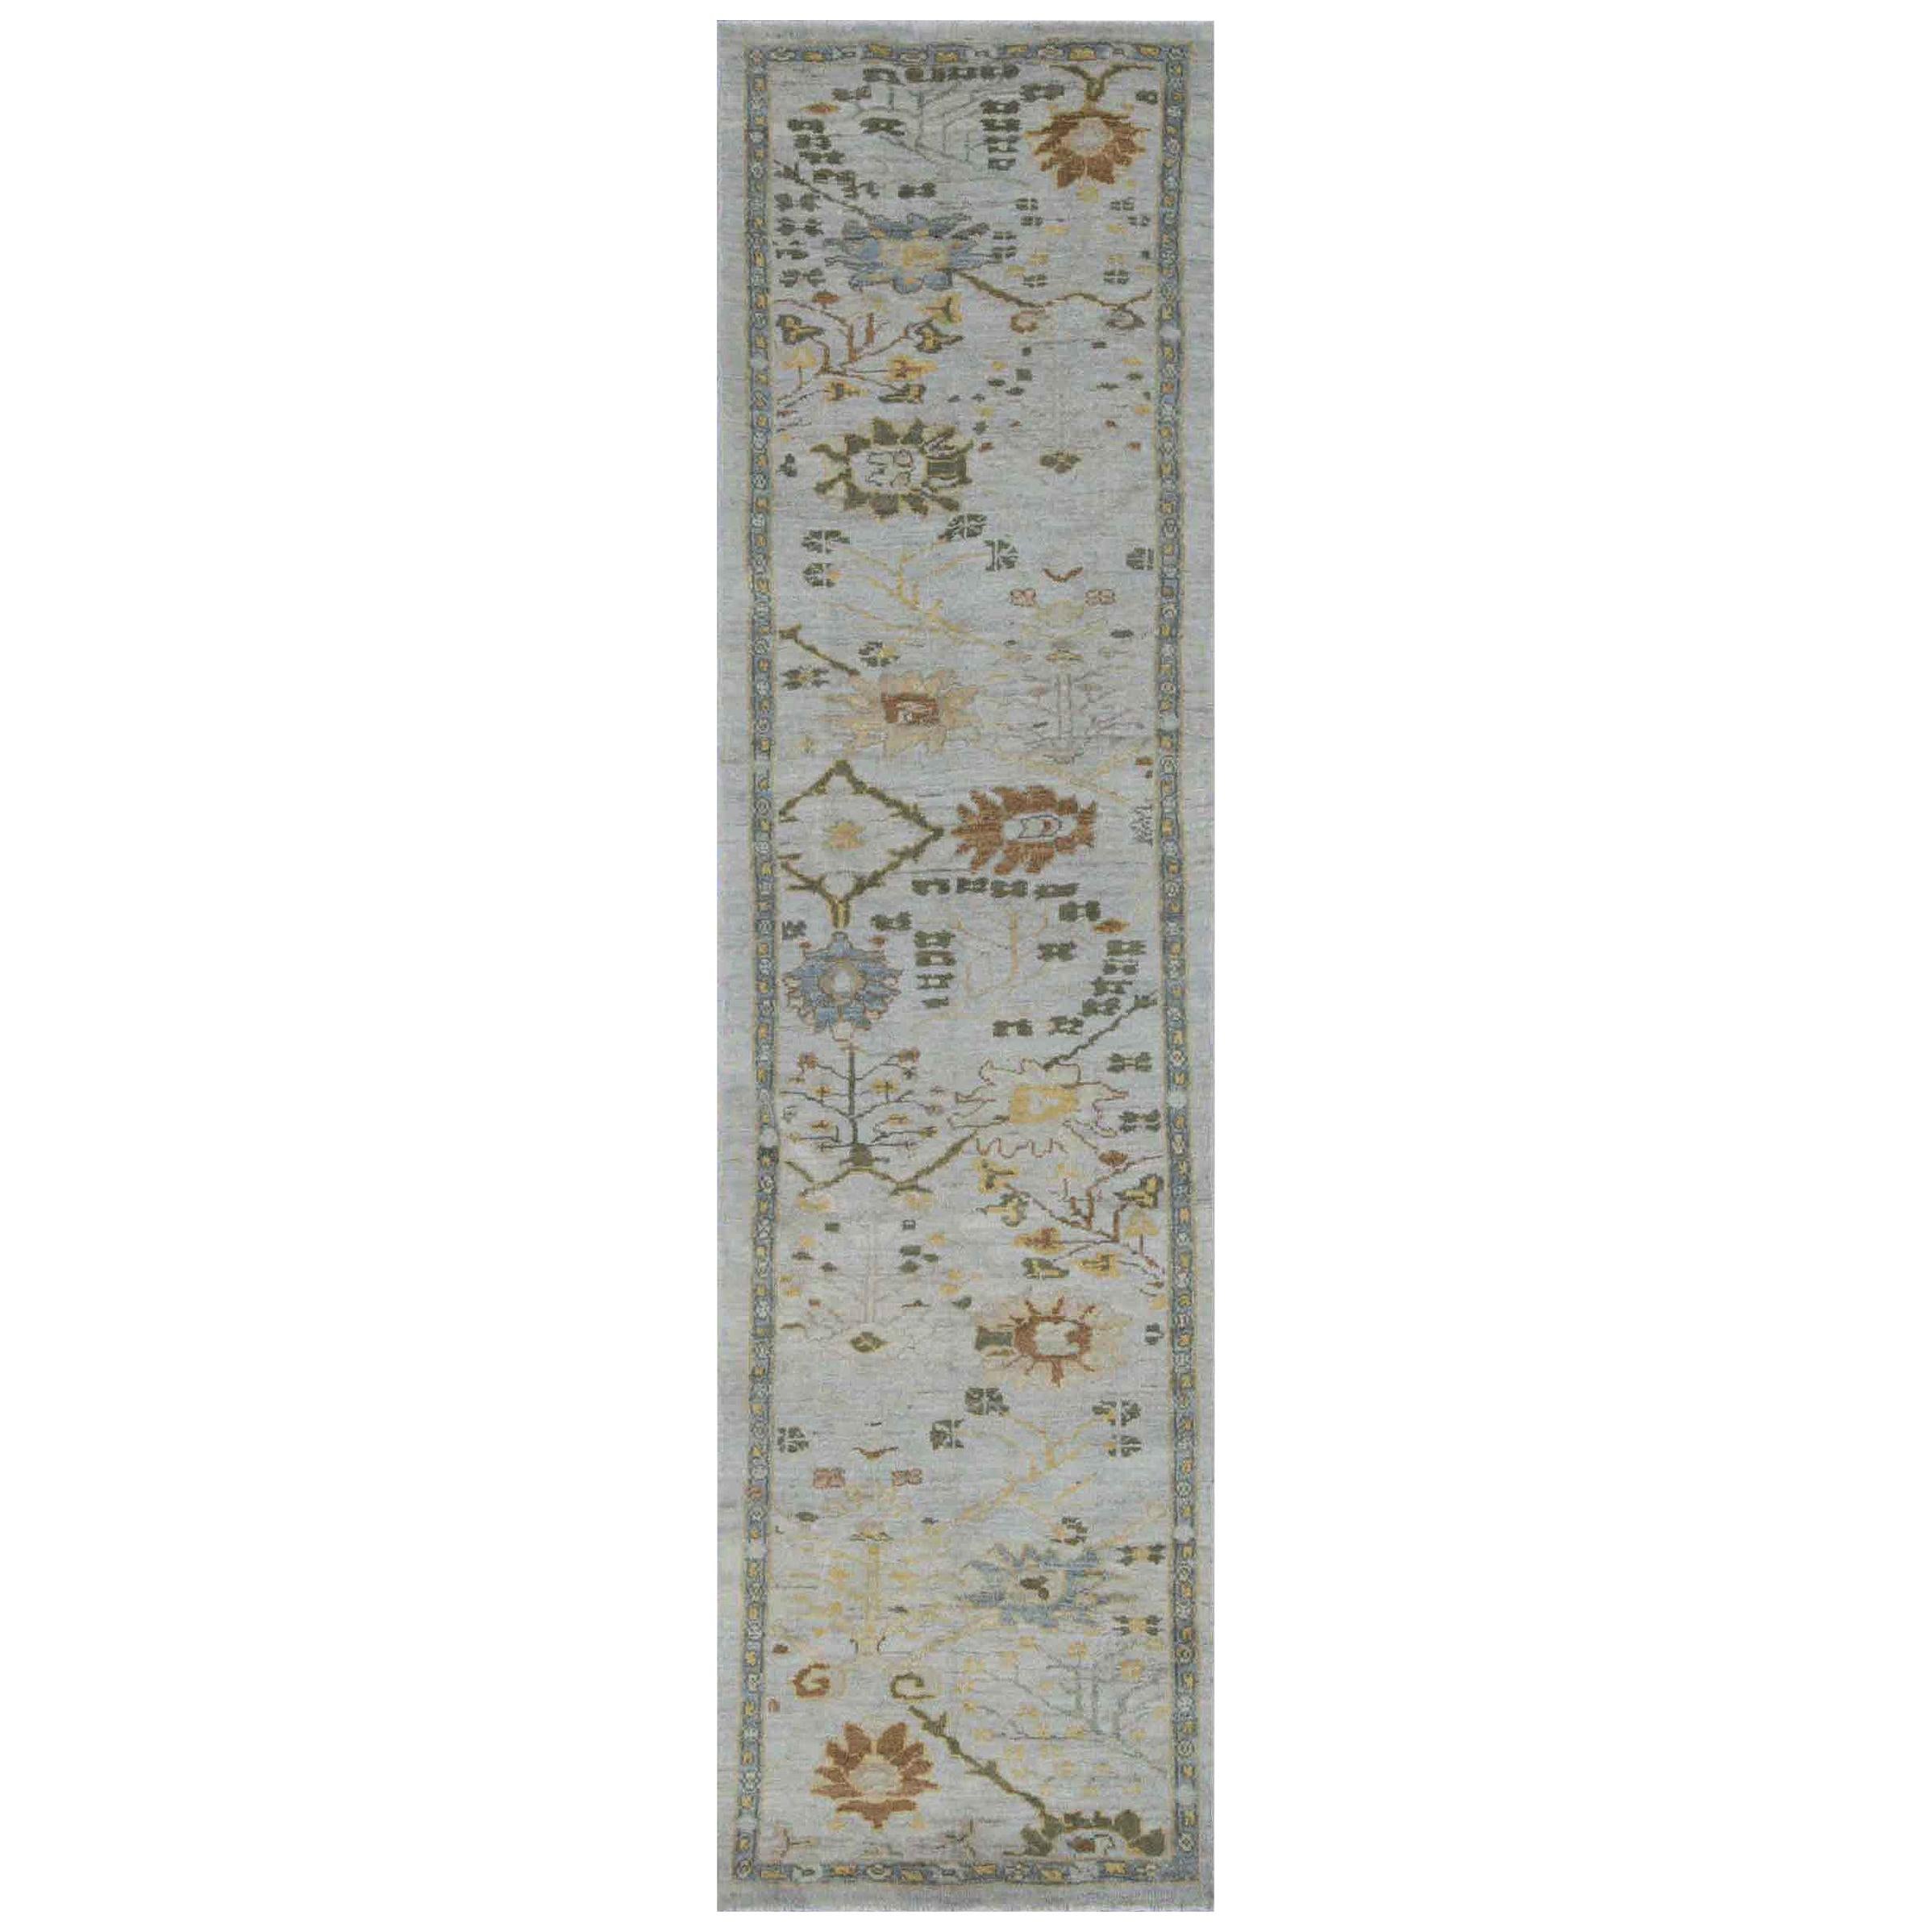 Modern Turkish Oushak Rug with Ivory Field and Brown Floral Details